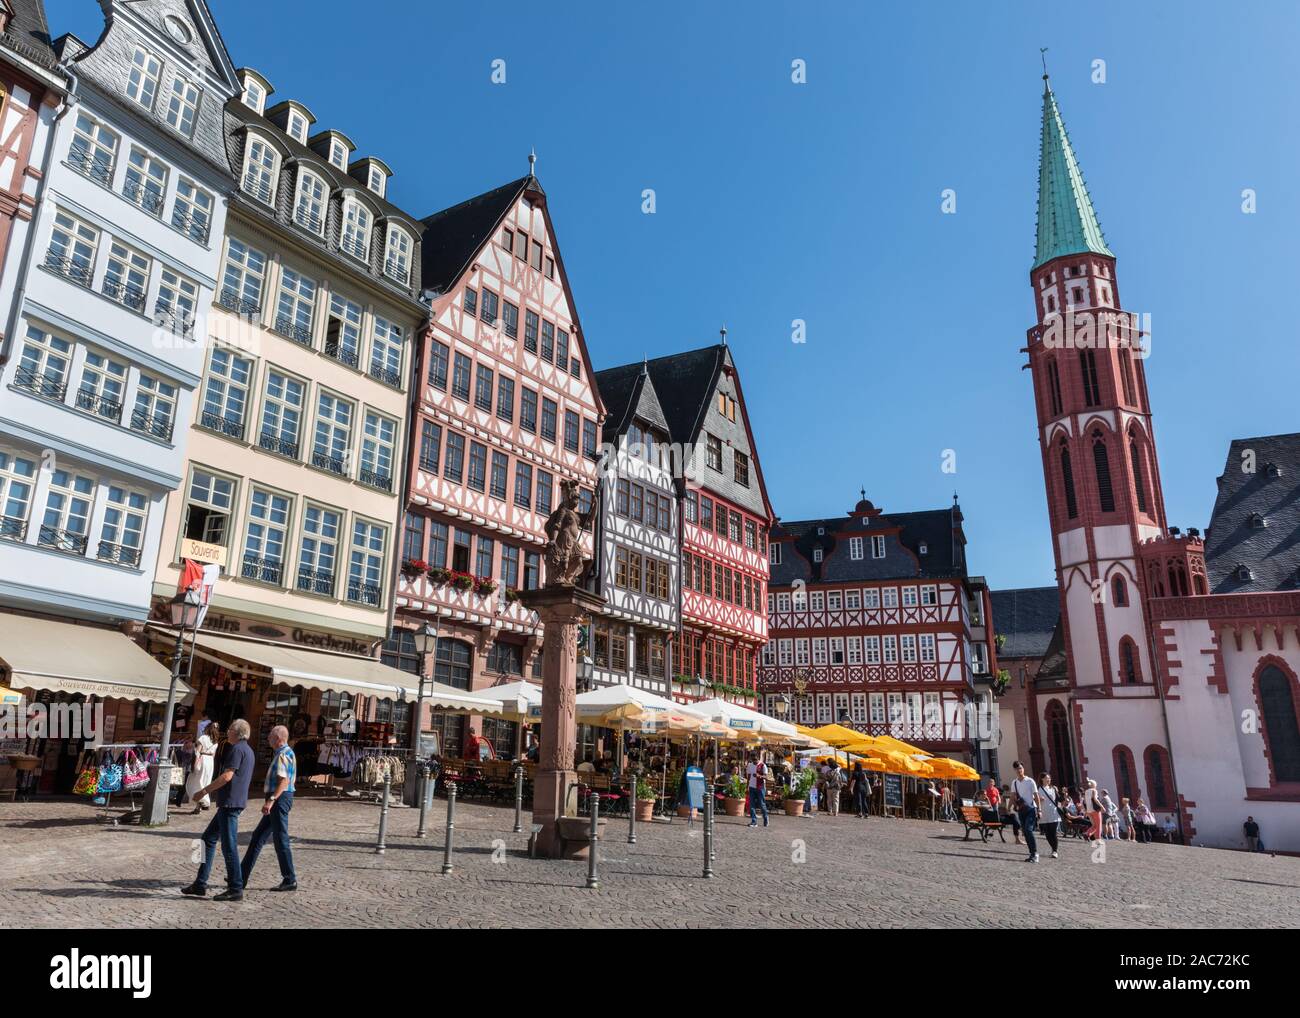 Historic buildings and facades at Römerberg square, a landmar and tourist destination in Frankfurt am Main, Hesse, Germany Stock Photo